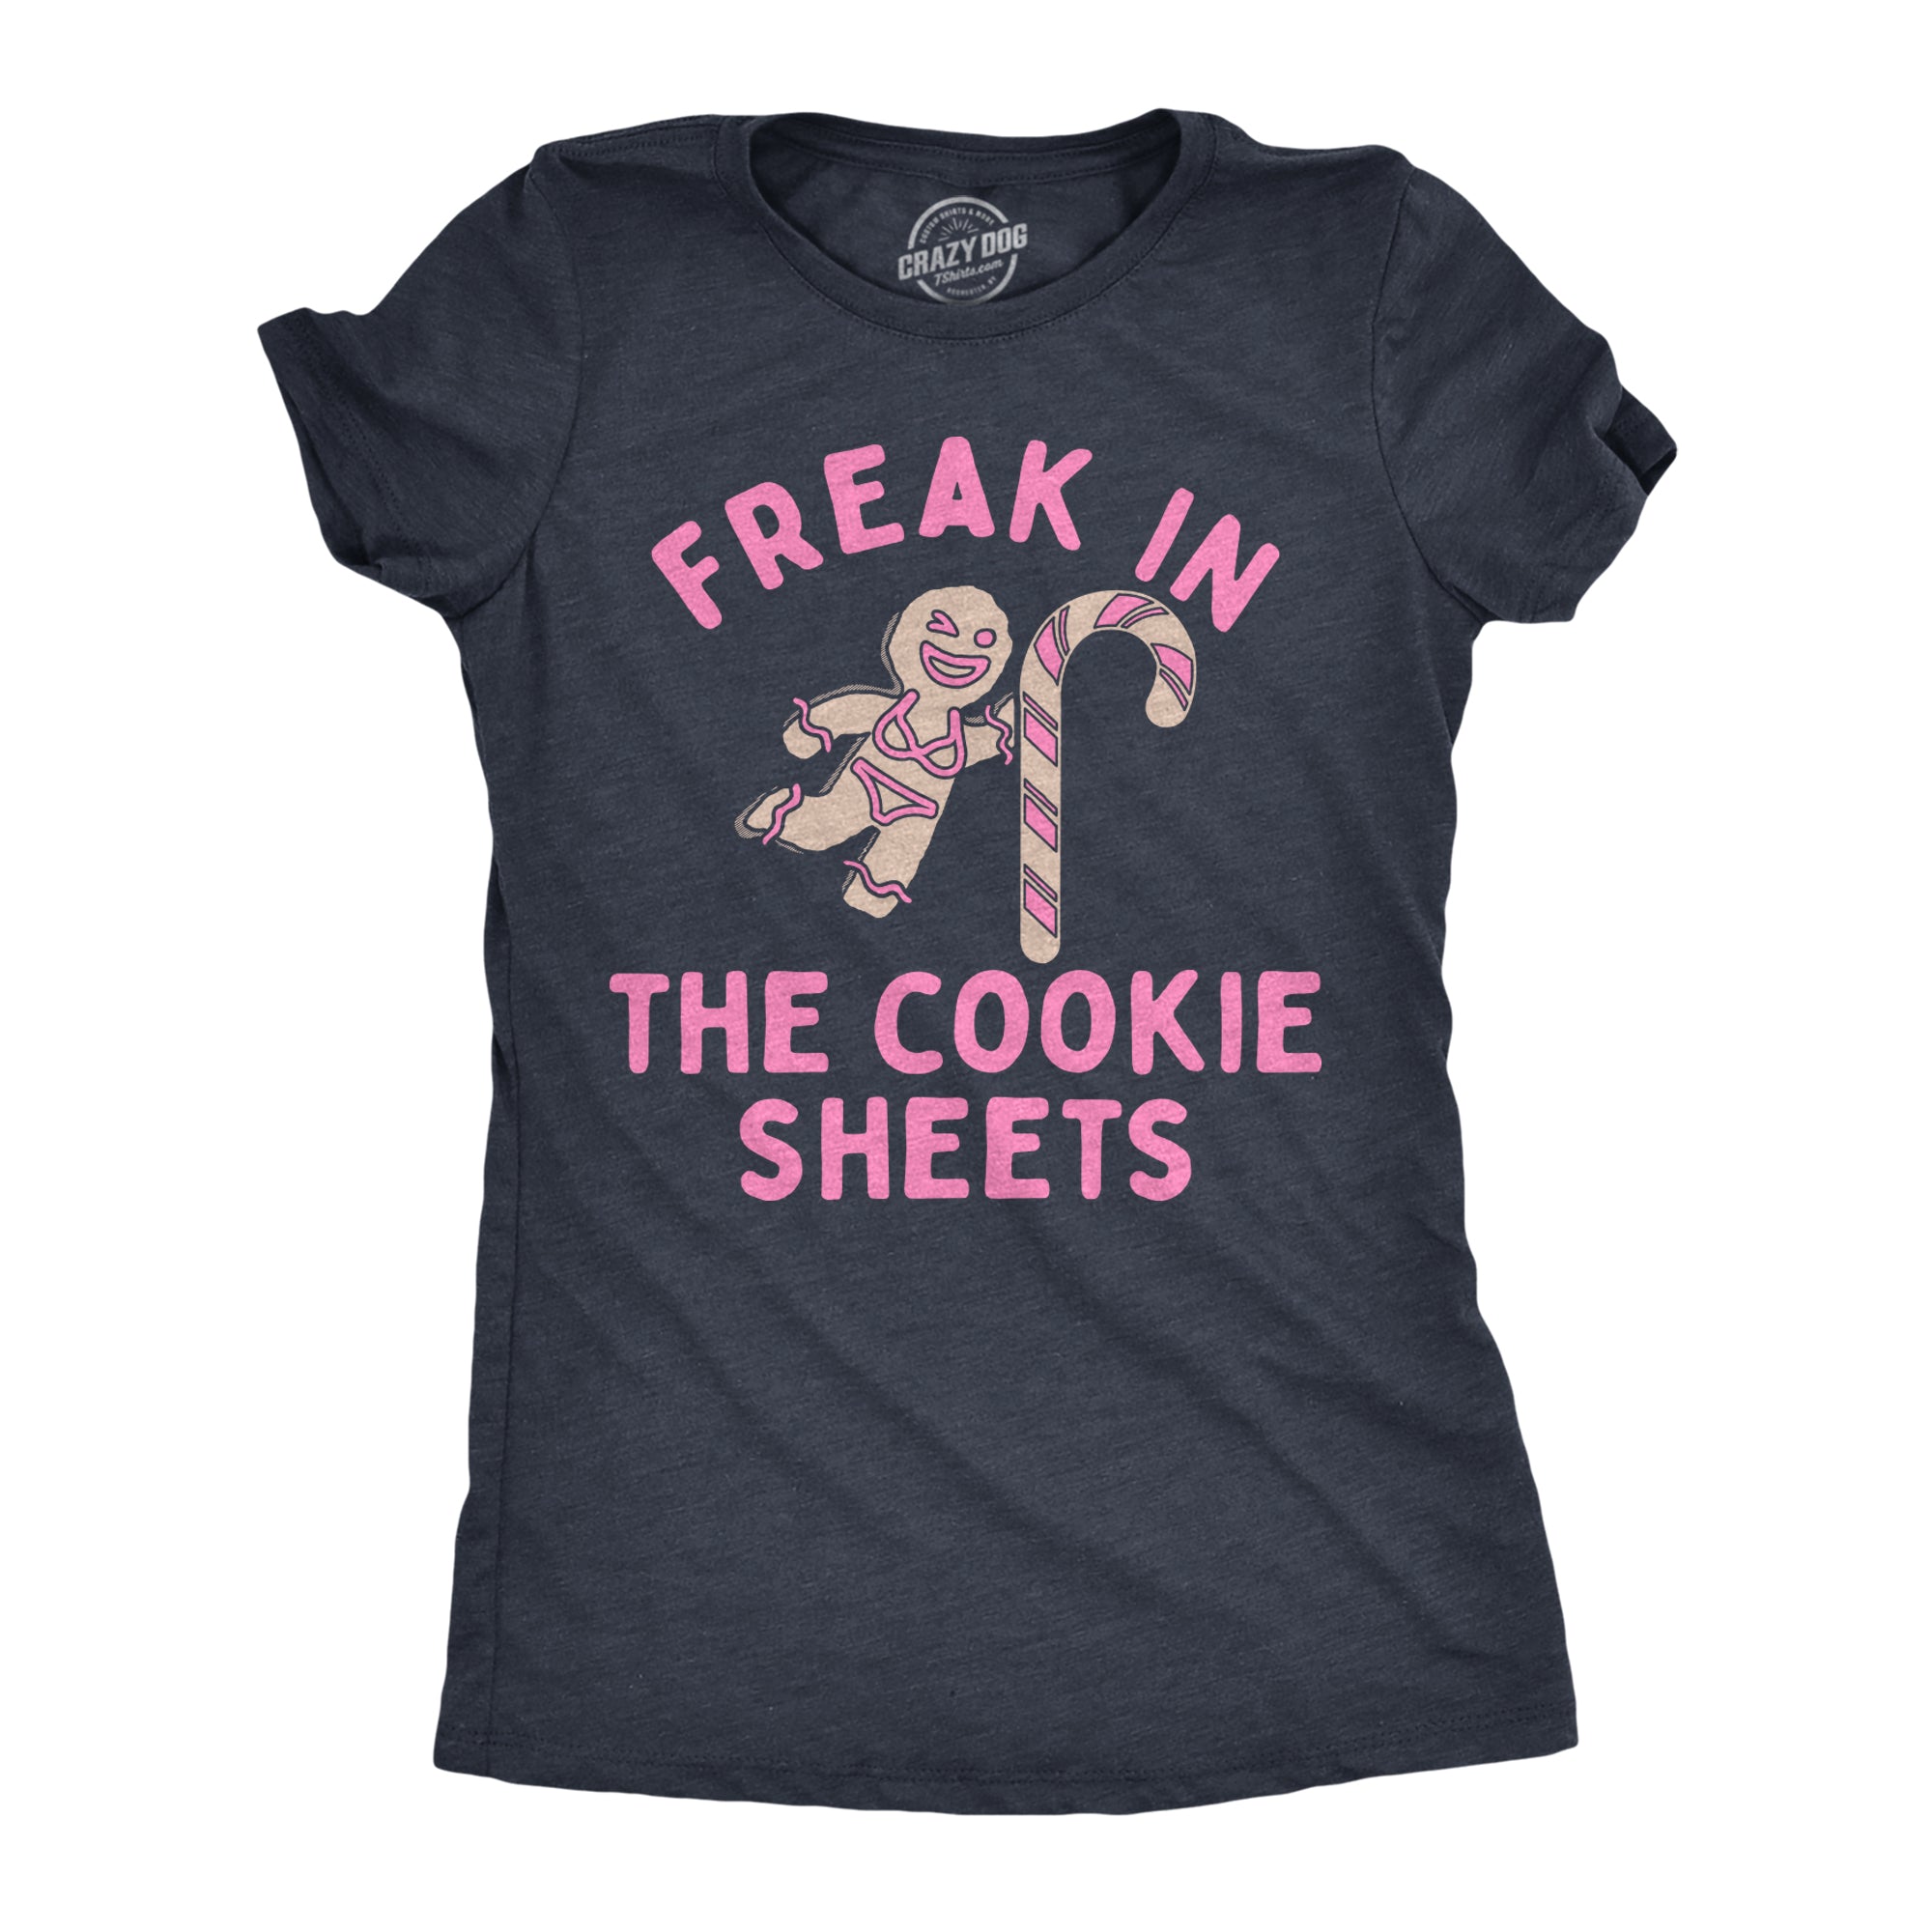 Funny Heather Navy - FREAK Freak In The Cookie Sheets Womens T Shirt Nerdy Christmas Food sex Tee